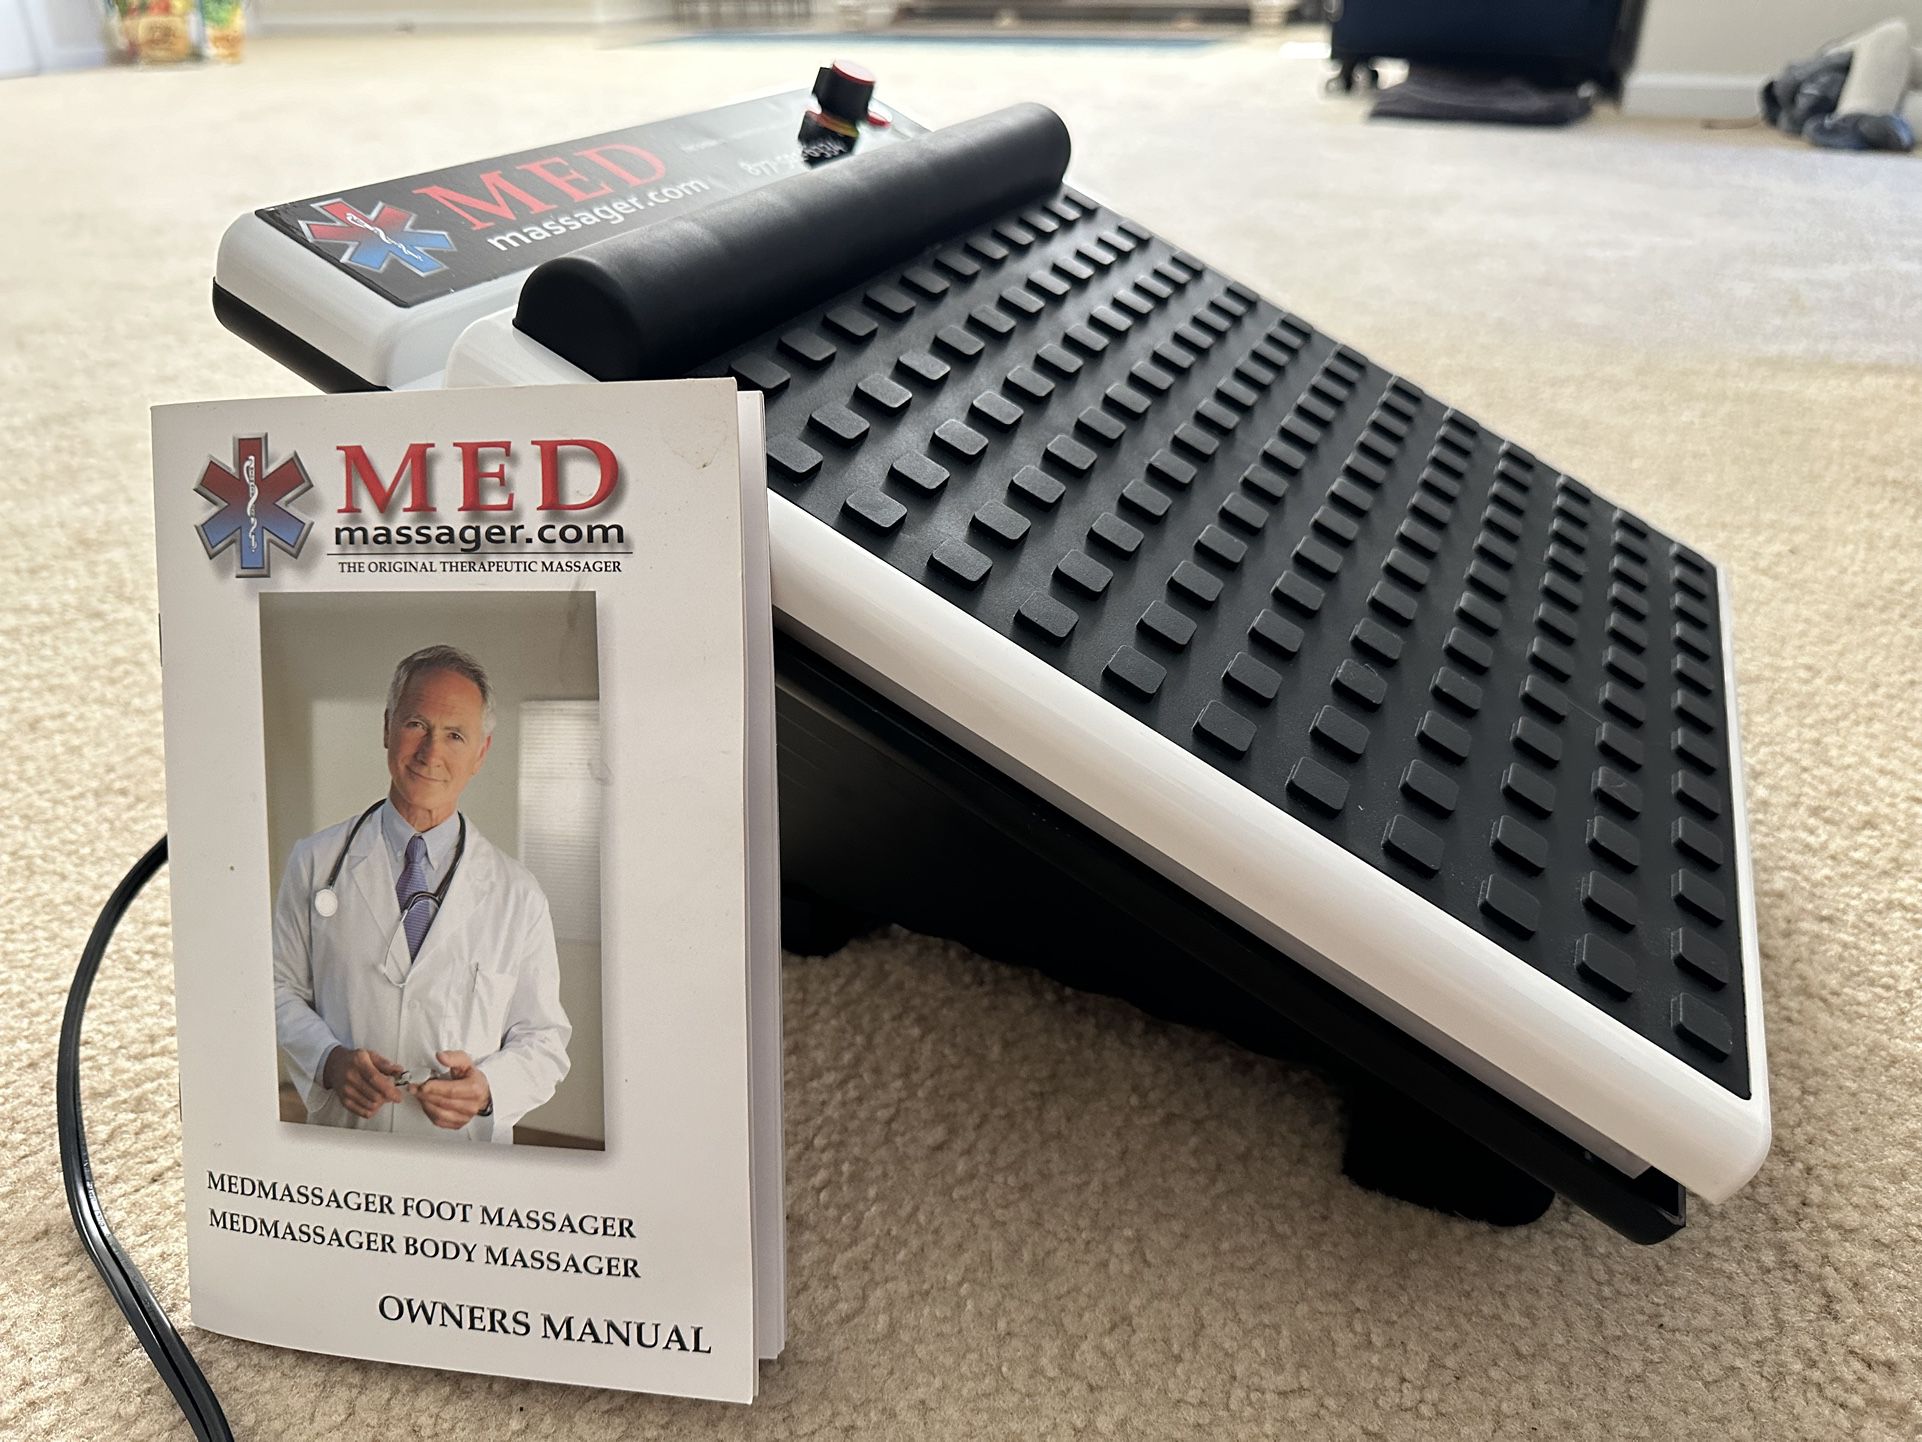 Med Therapeutic Foot Massager 